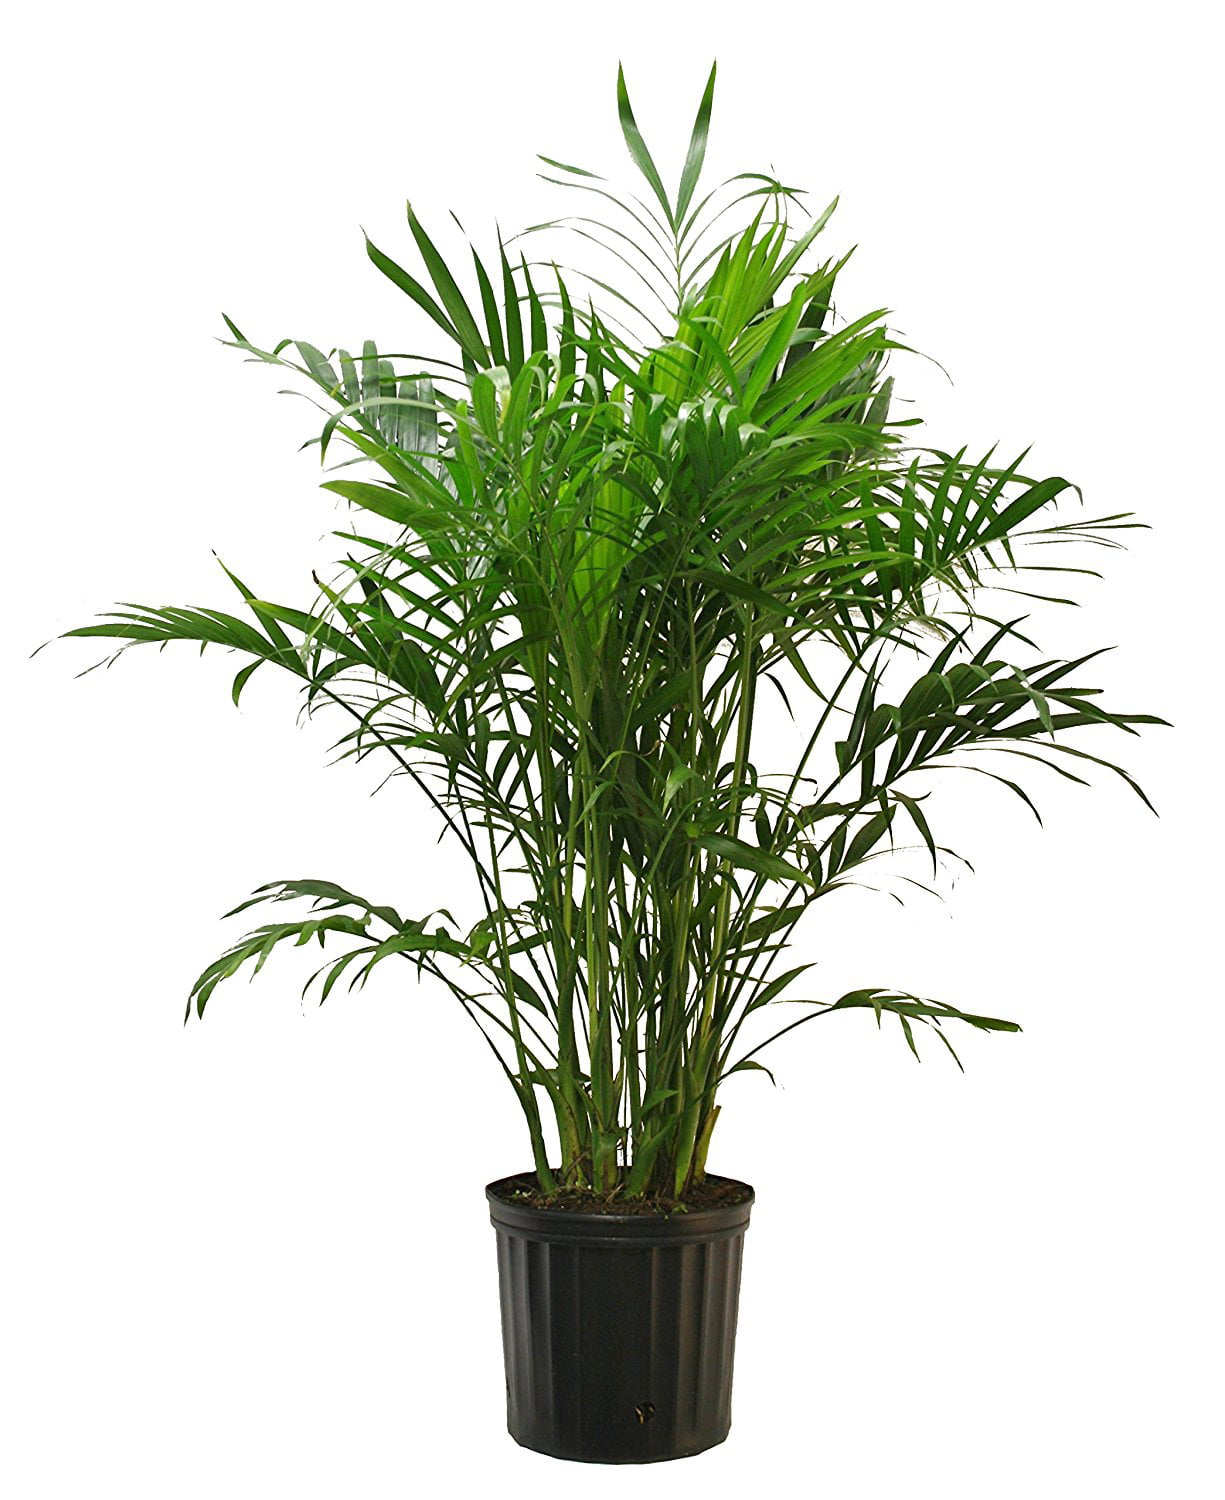 Costa Farms Live Indoor 25in. Tall Green Cat Palm Plant, Indirect